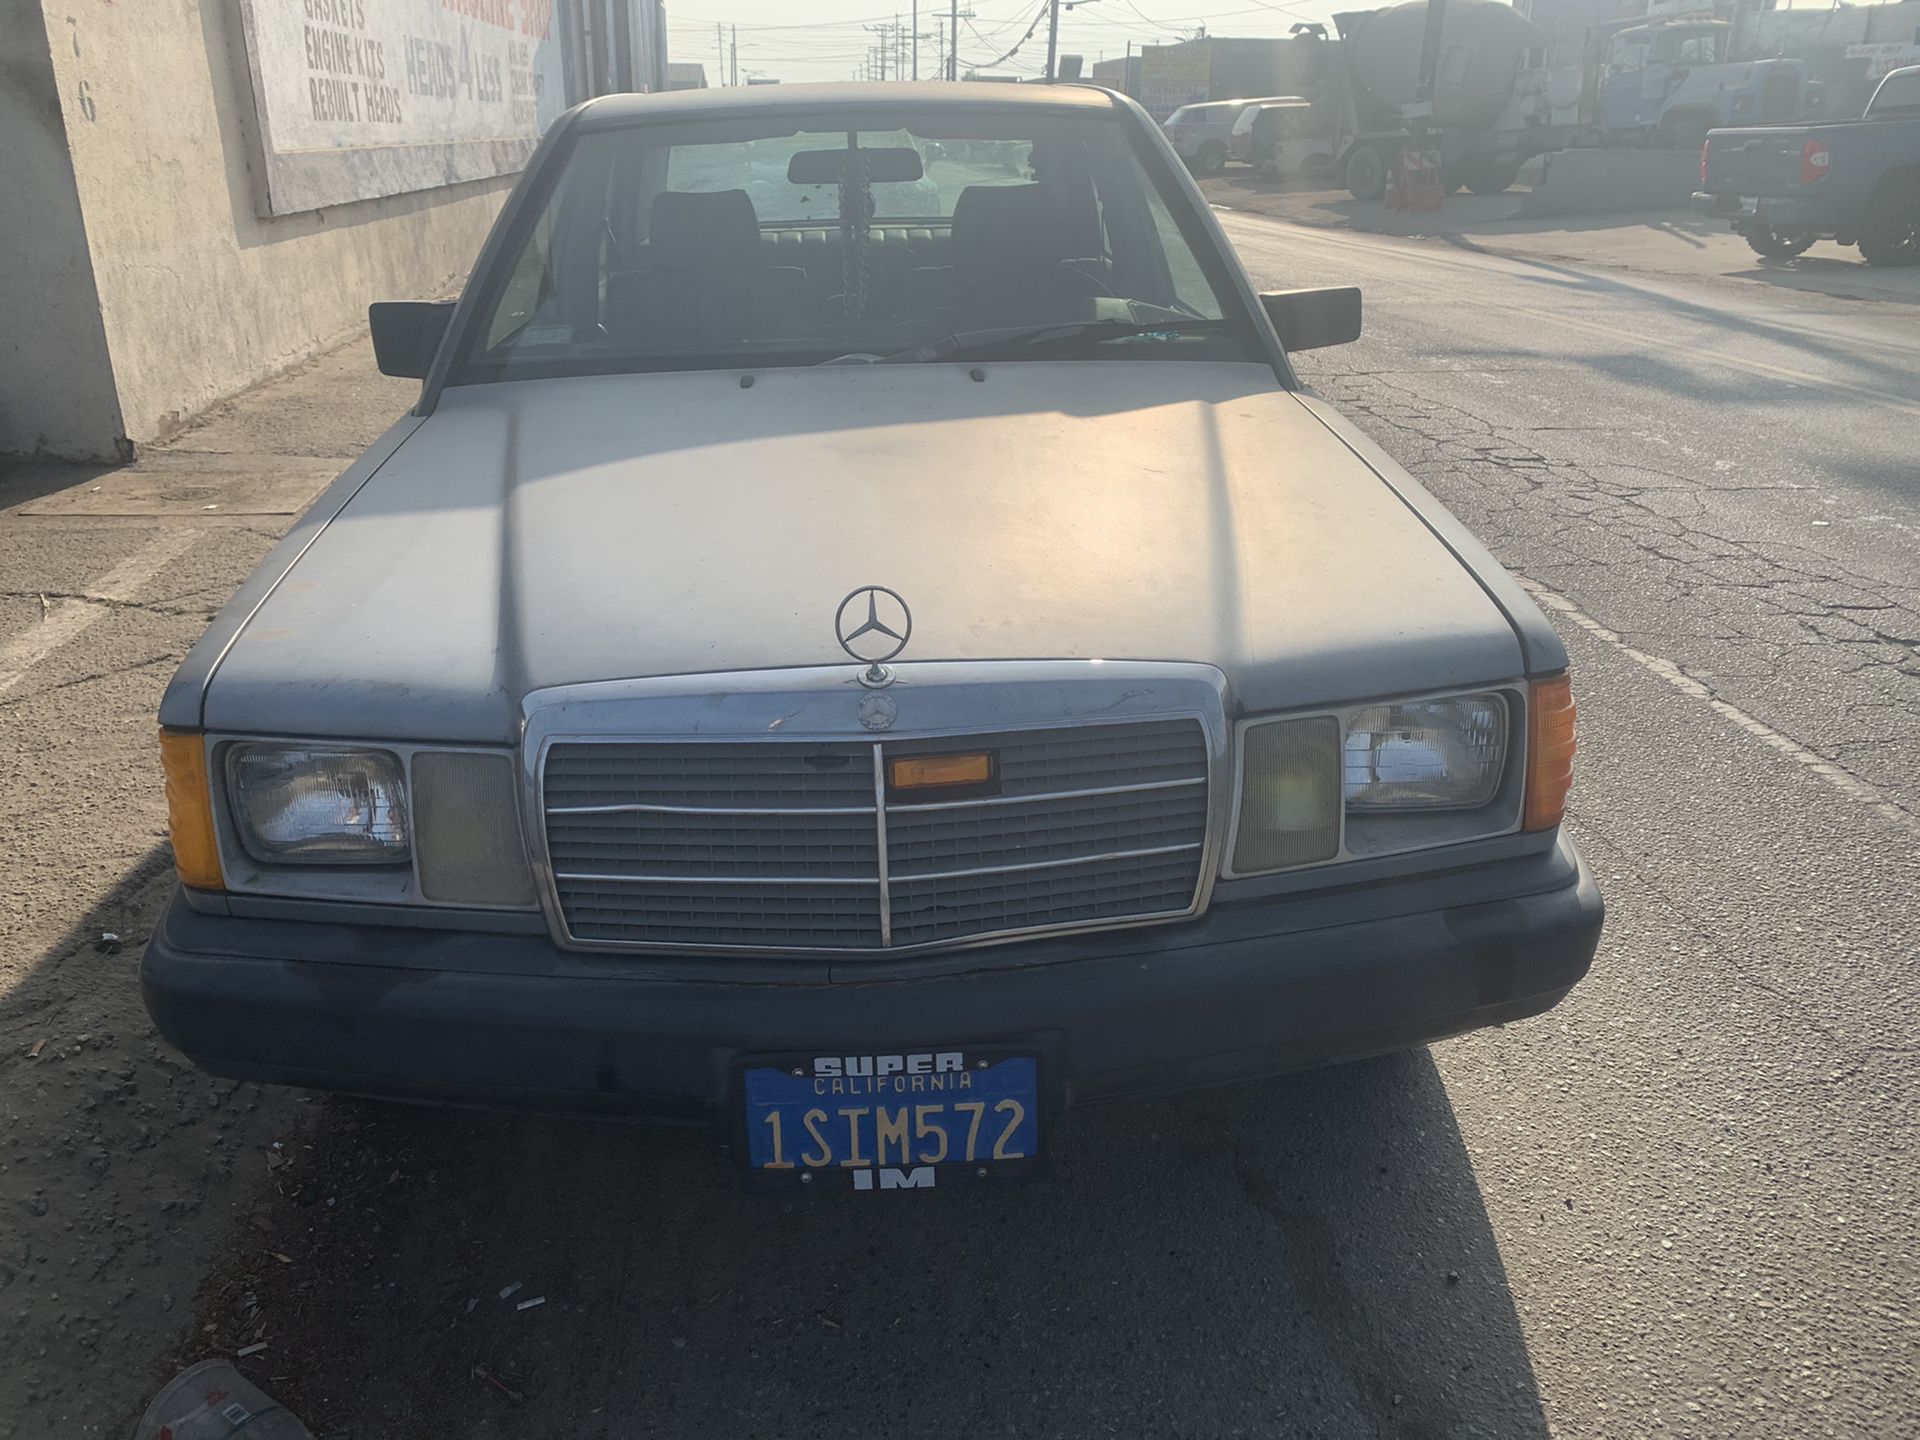 1984 Mercedes 190 D diesel Parting out everything must go fast